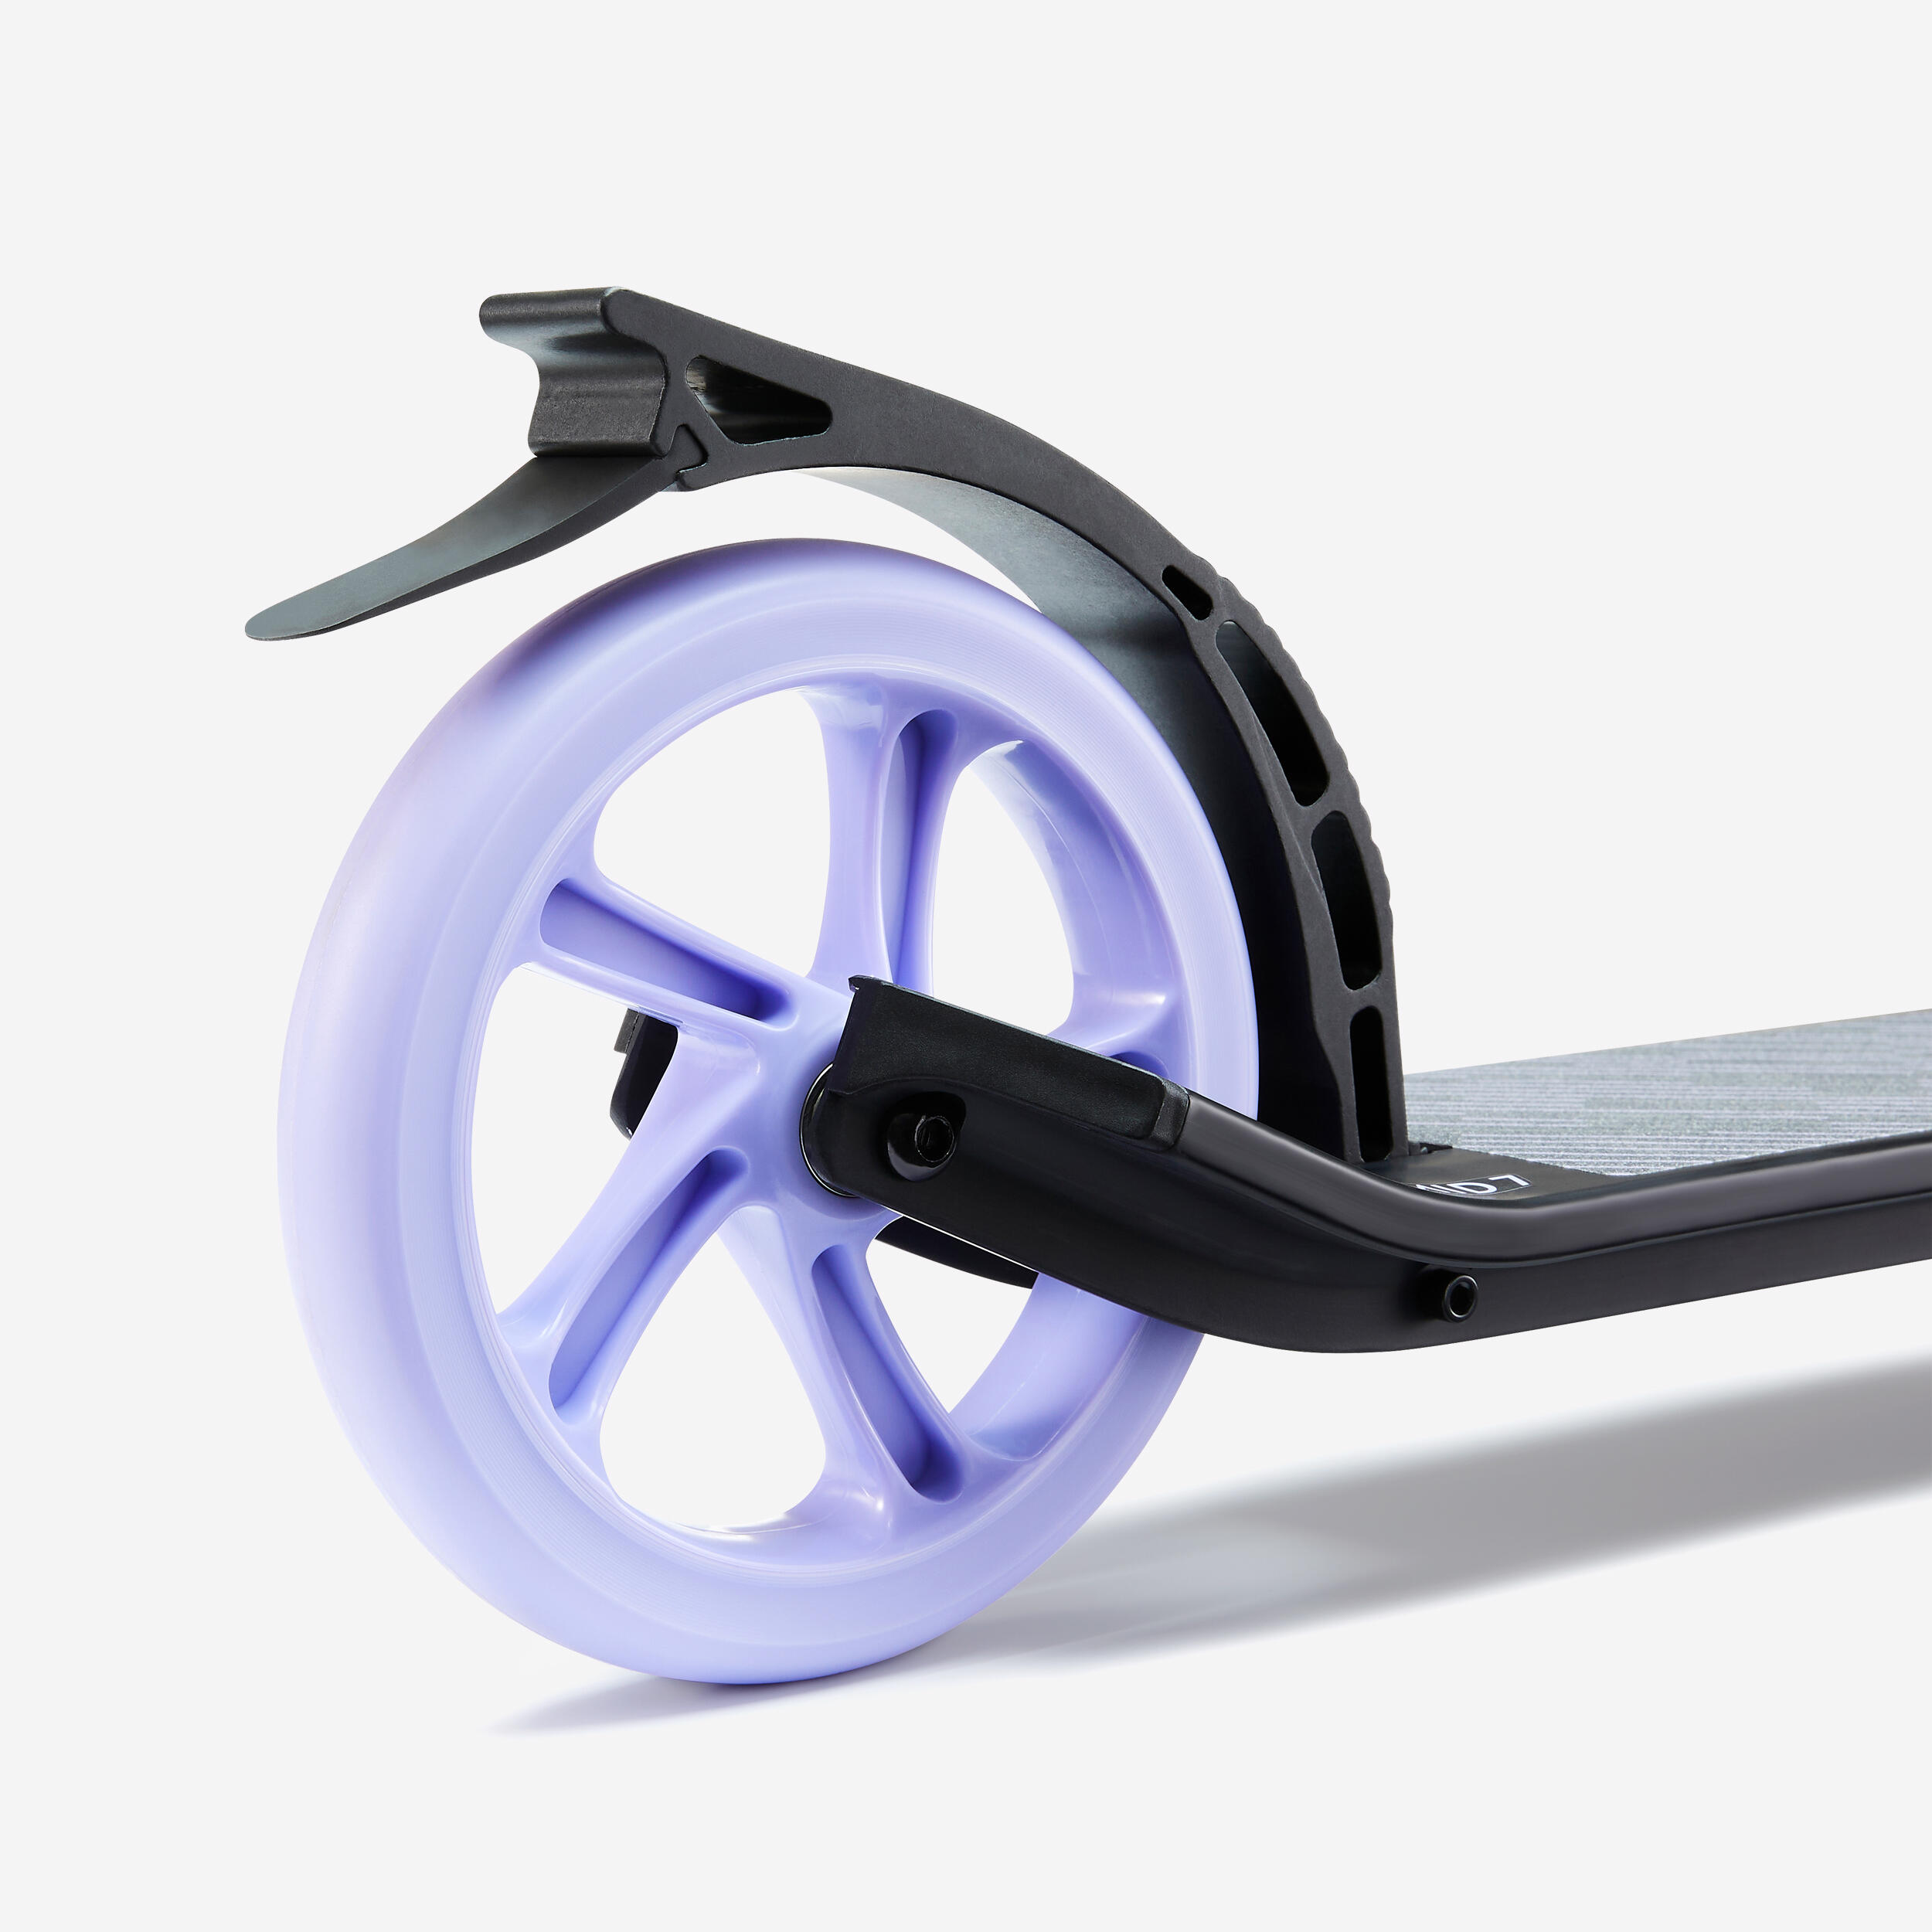 Scooter with Kickstand MID 7 - Black/Lavender 5/9